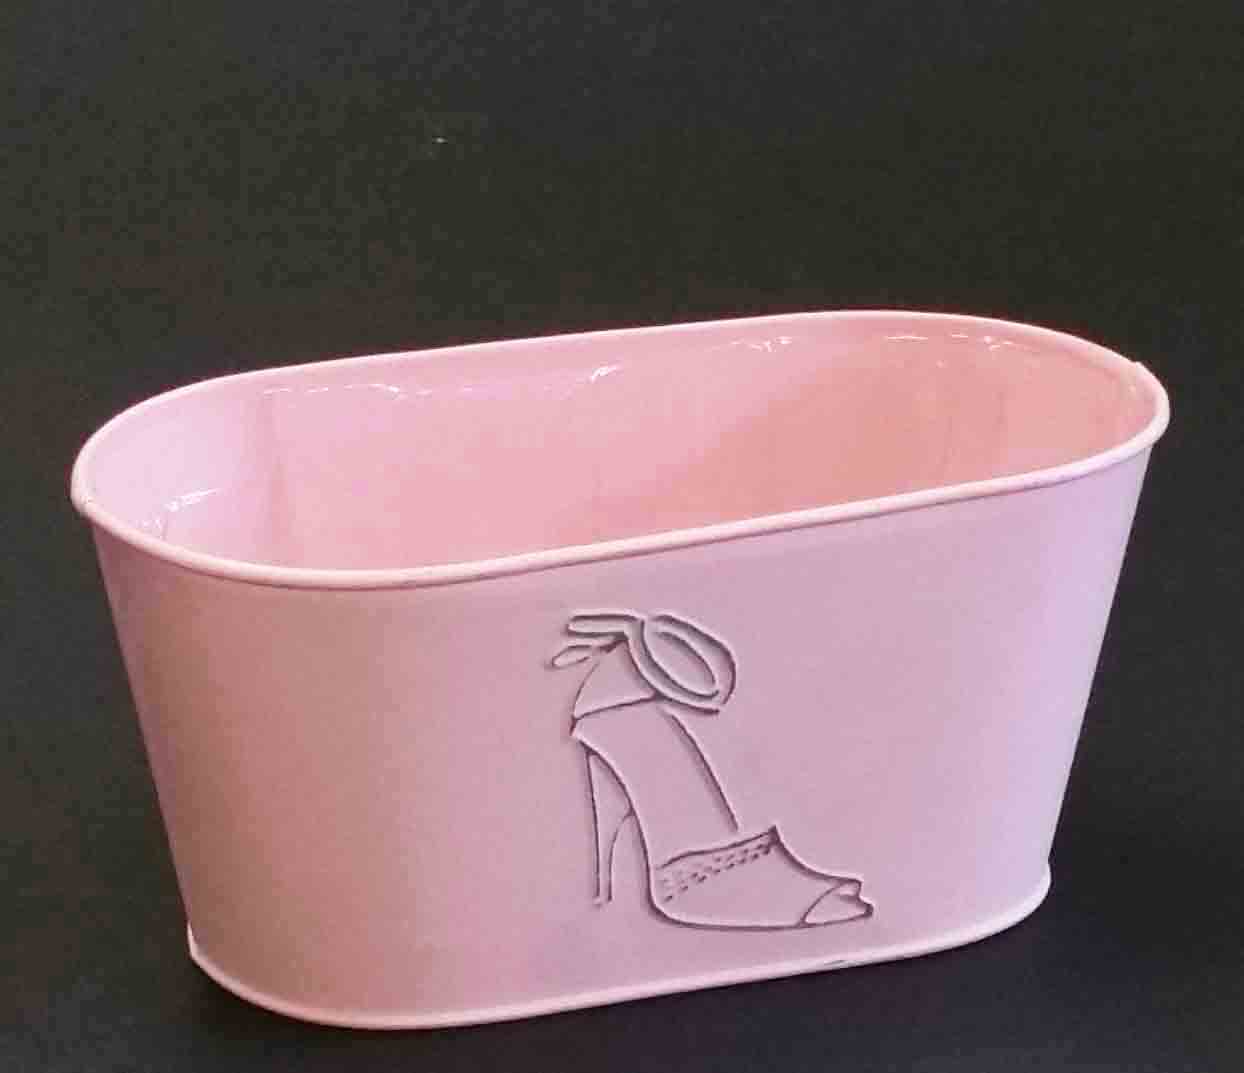 M4824 - 8.5" Pink Oval Metal Planter with Liner - 2.25 ea, 2.05/12